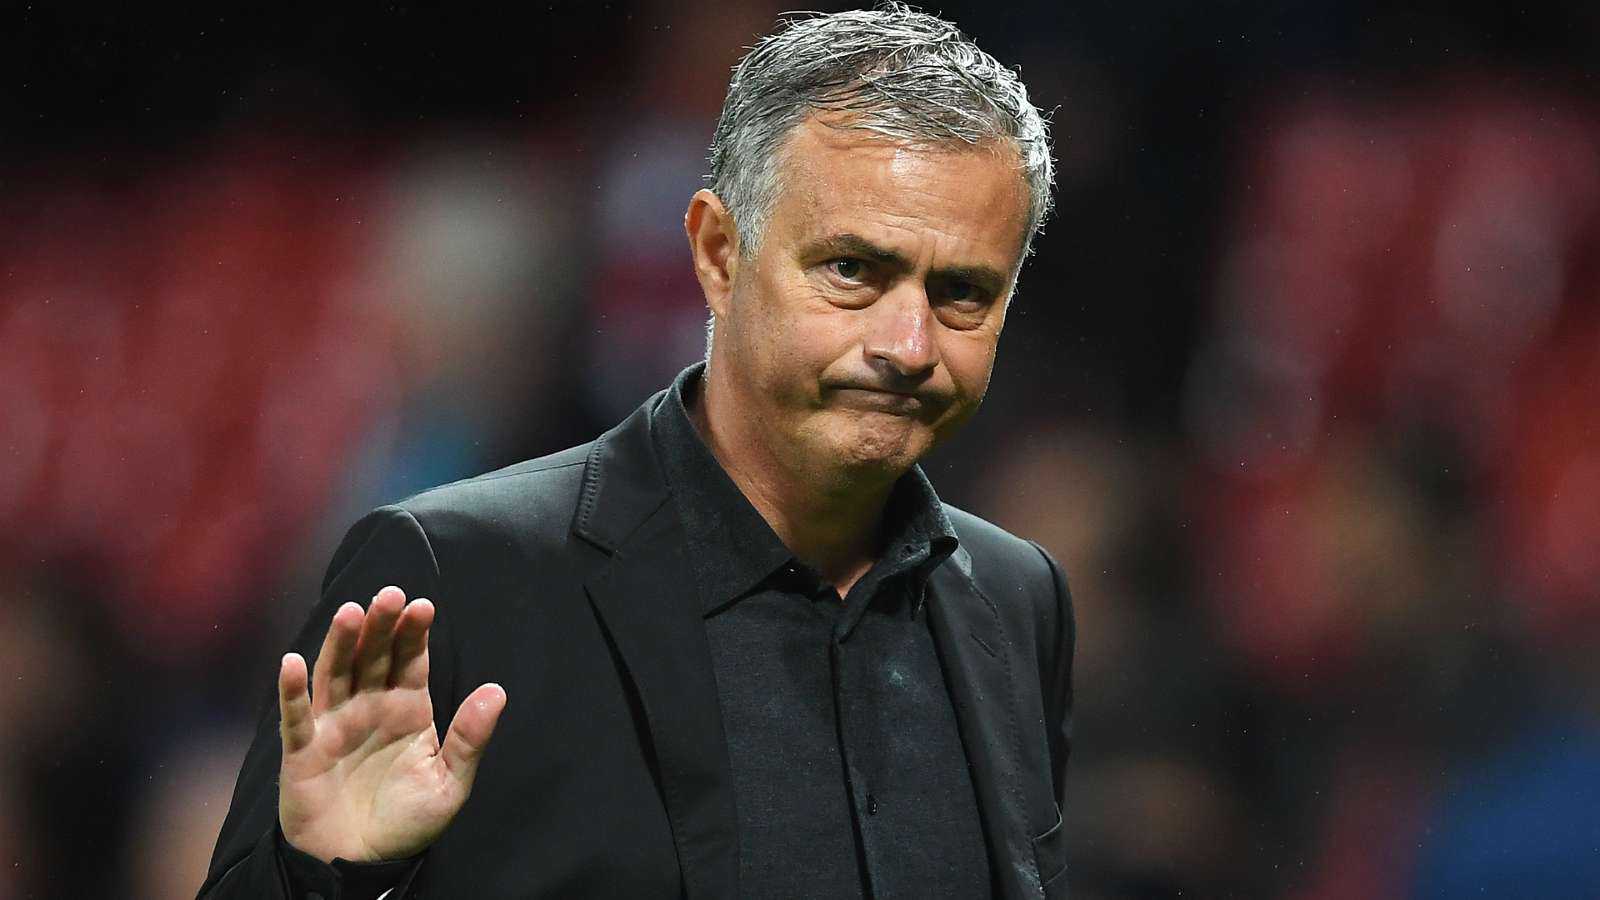 'I want to work with people I love' - Mourinho looking to avoid conflict at next job